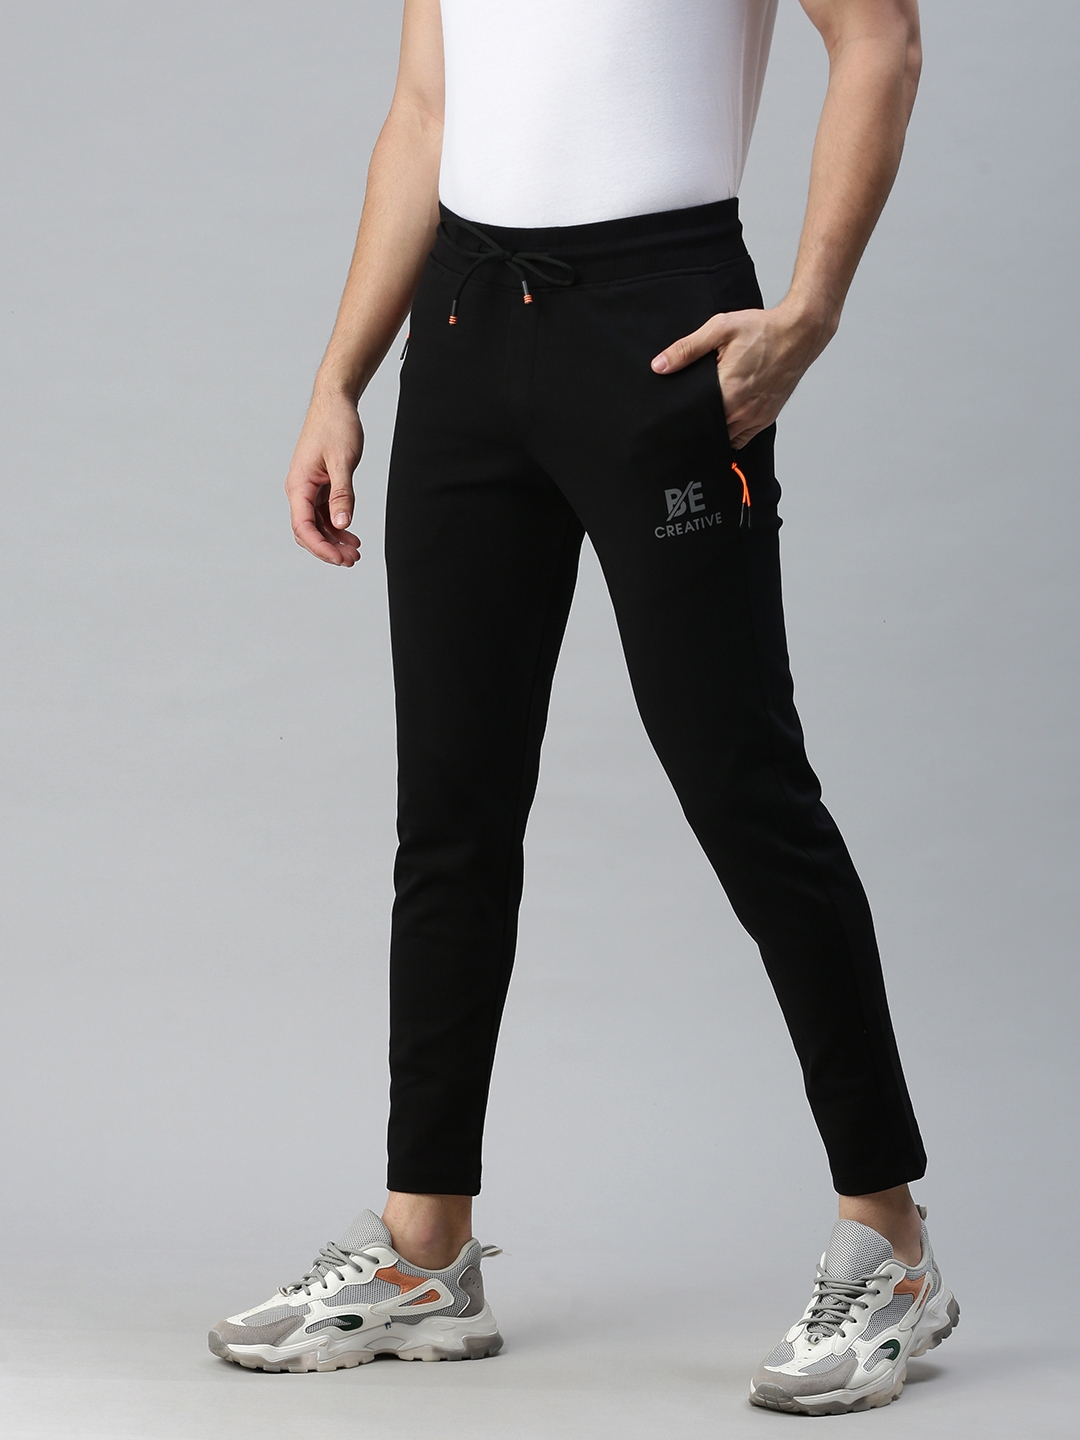 Wholesale Slim Fit Track Pants  China Pants and Wholesale Track Pants  price  MadeinChinacom